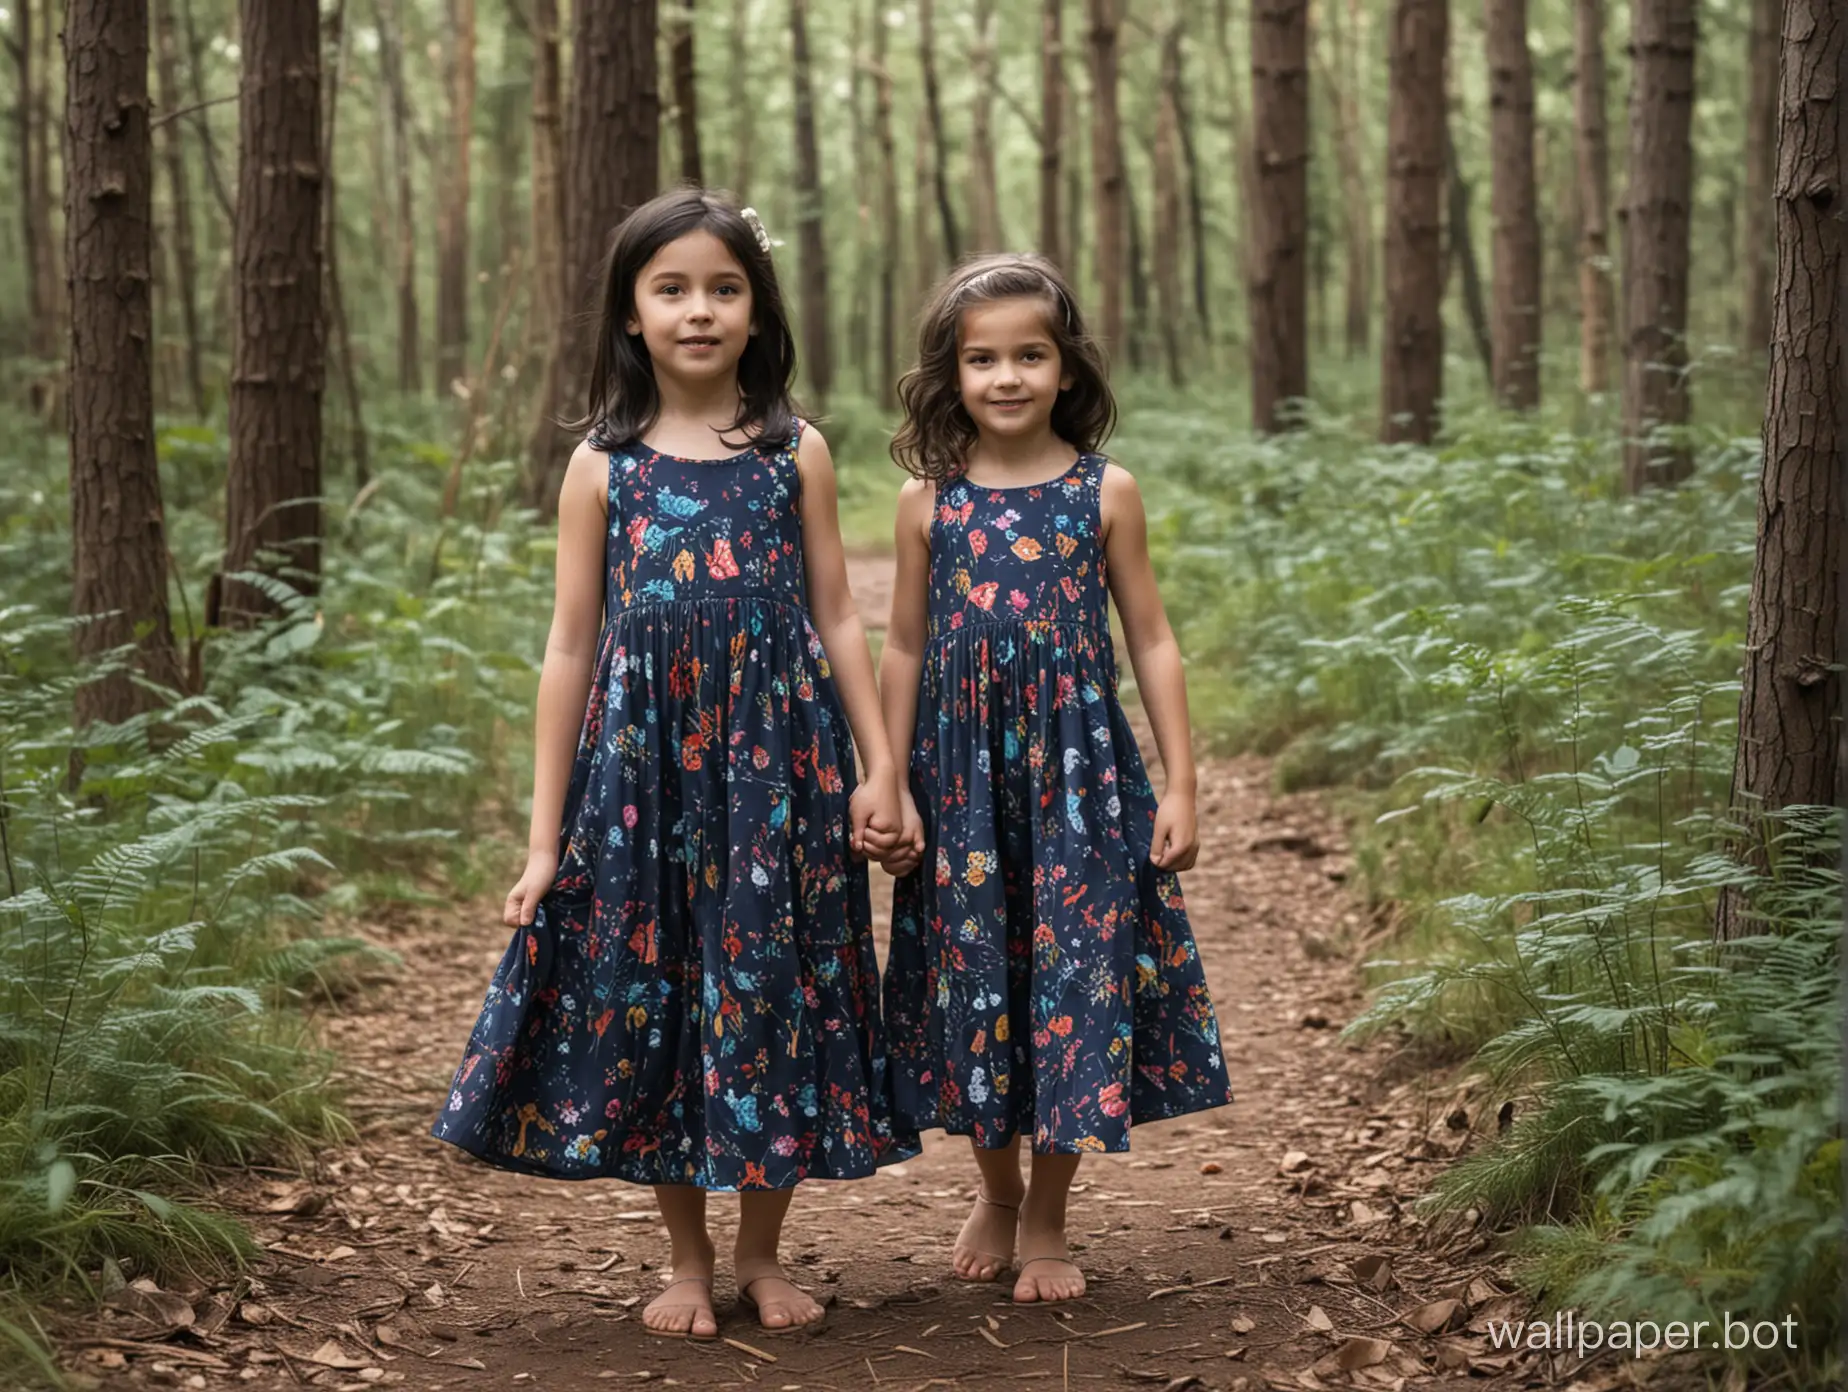 girls with dark hair, one girl is 6 years old and the other girl is 8 years old, in dress outside in forest setting